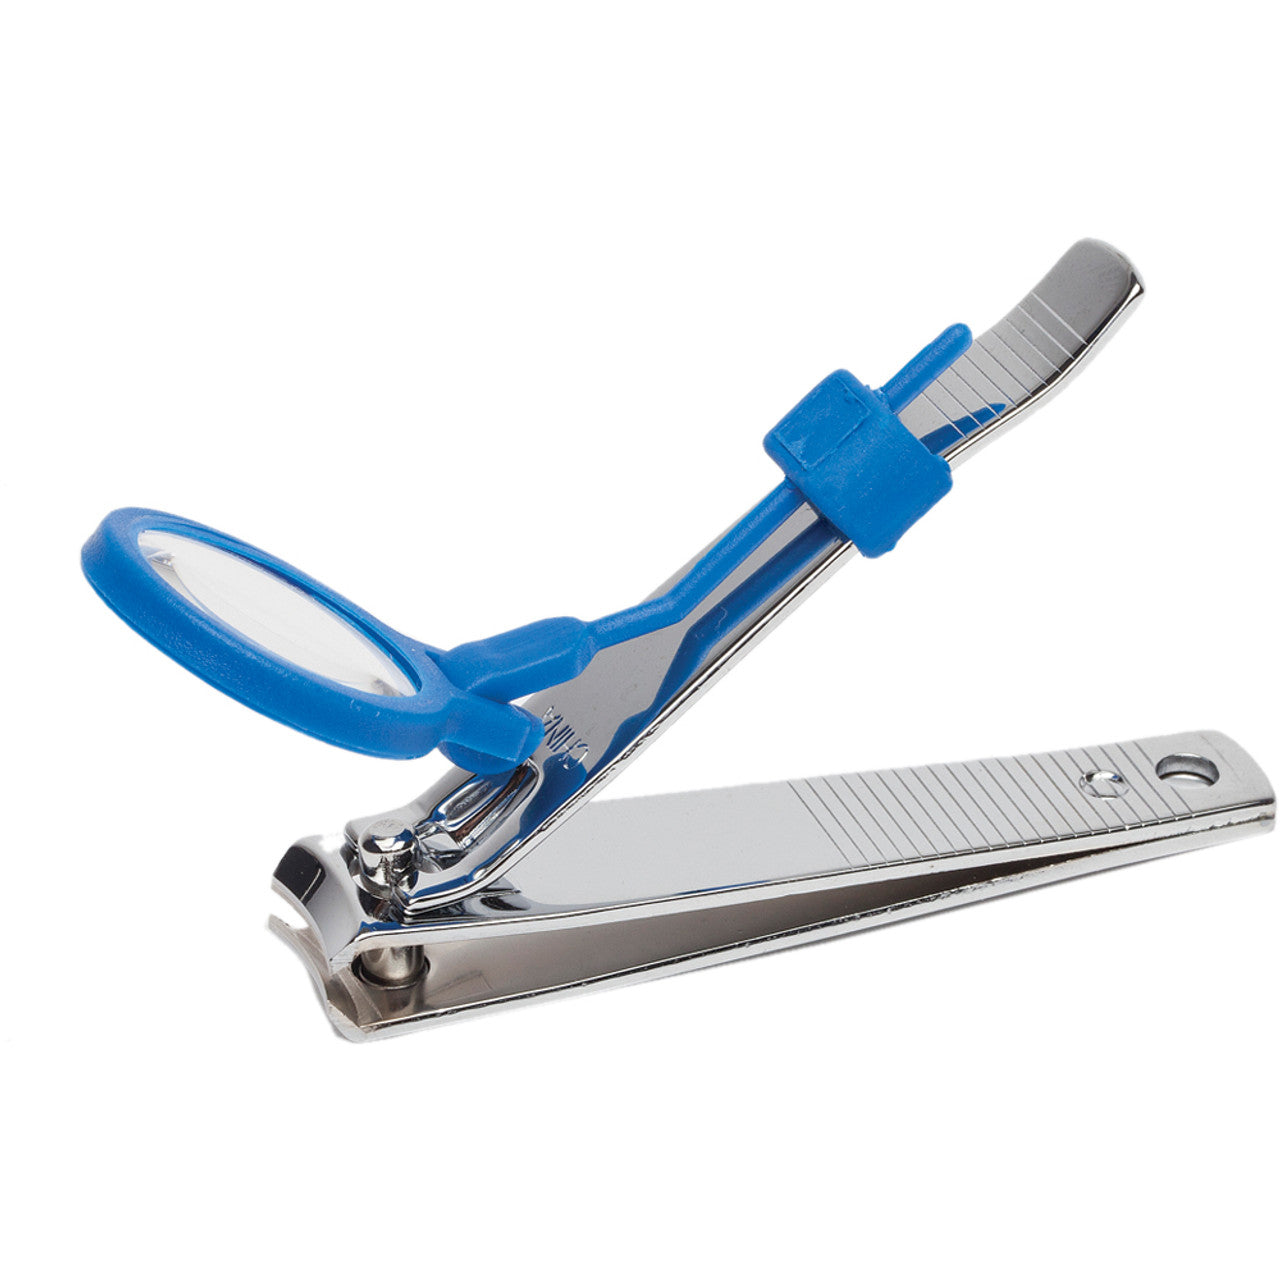 Toenail Clippers with Catcher - BlairHaus Interiors and Home Staging